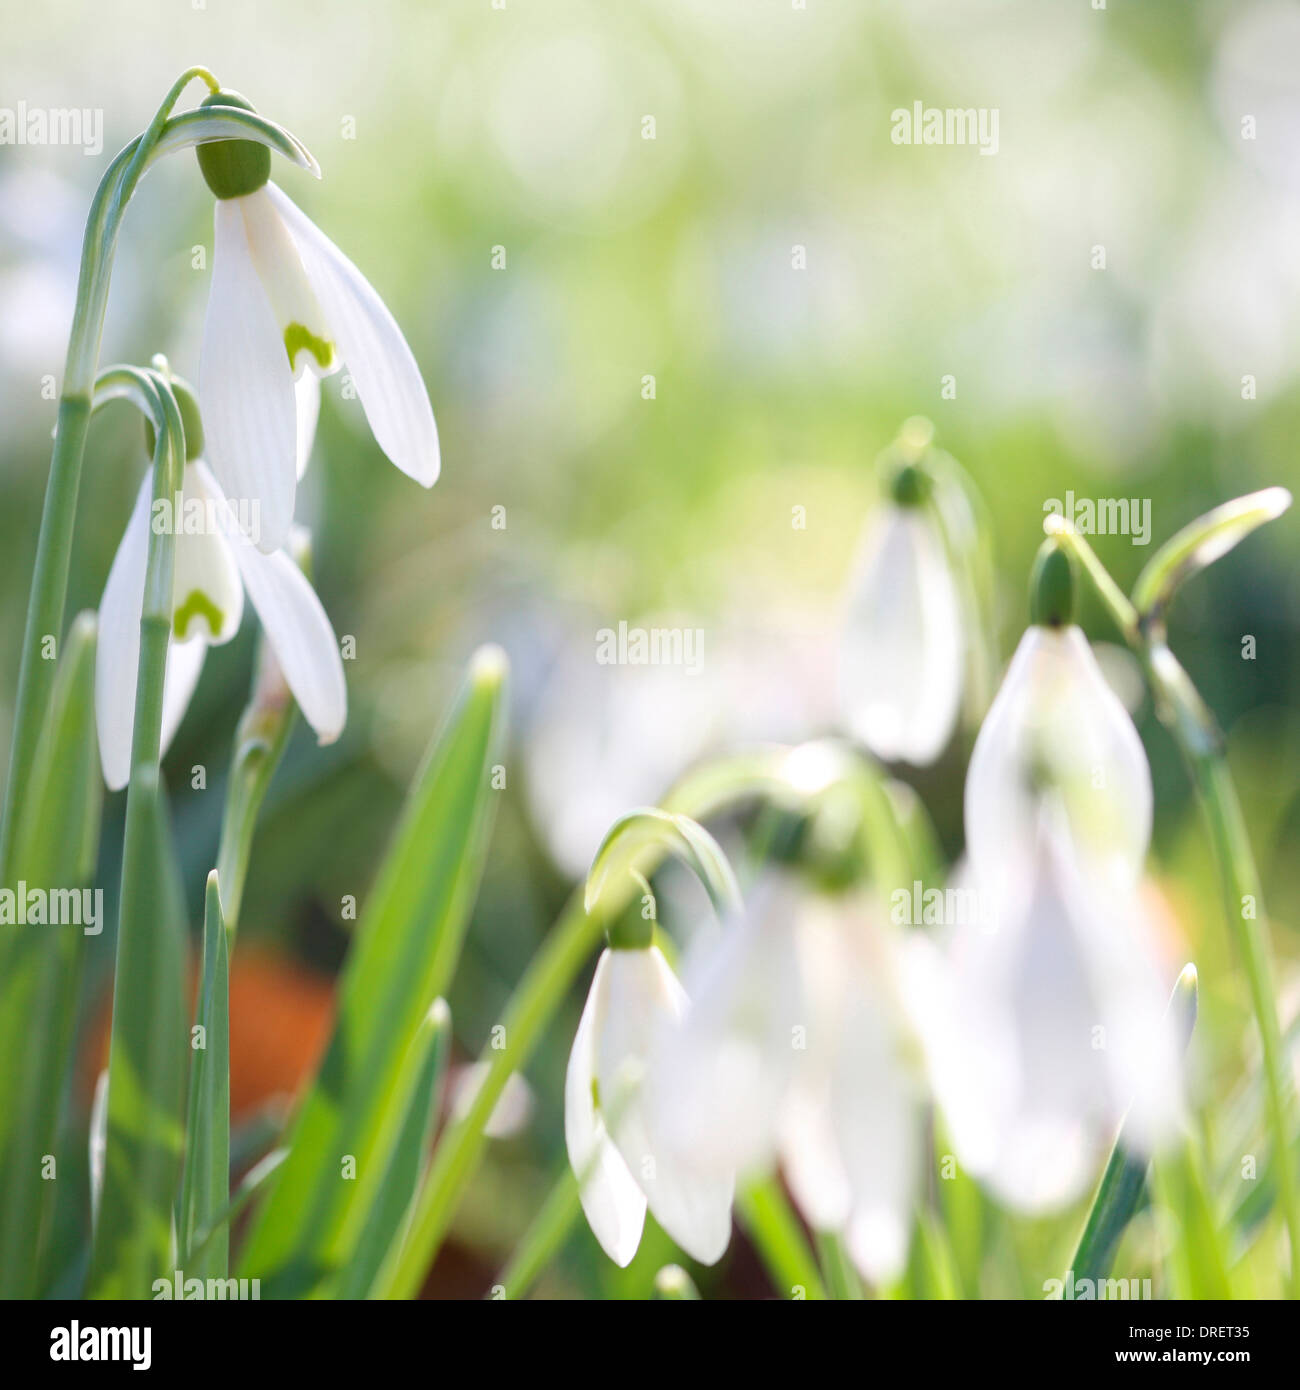 A Thoughtful and Meditative Image of Springtime  Jane Ann Butler Photography  JABP693 Stock Photo